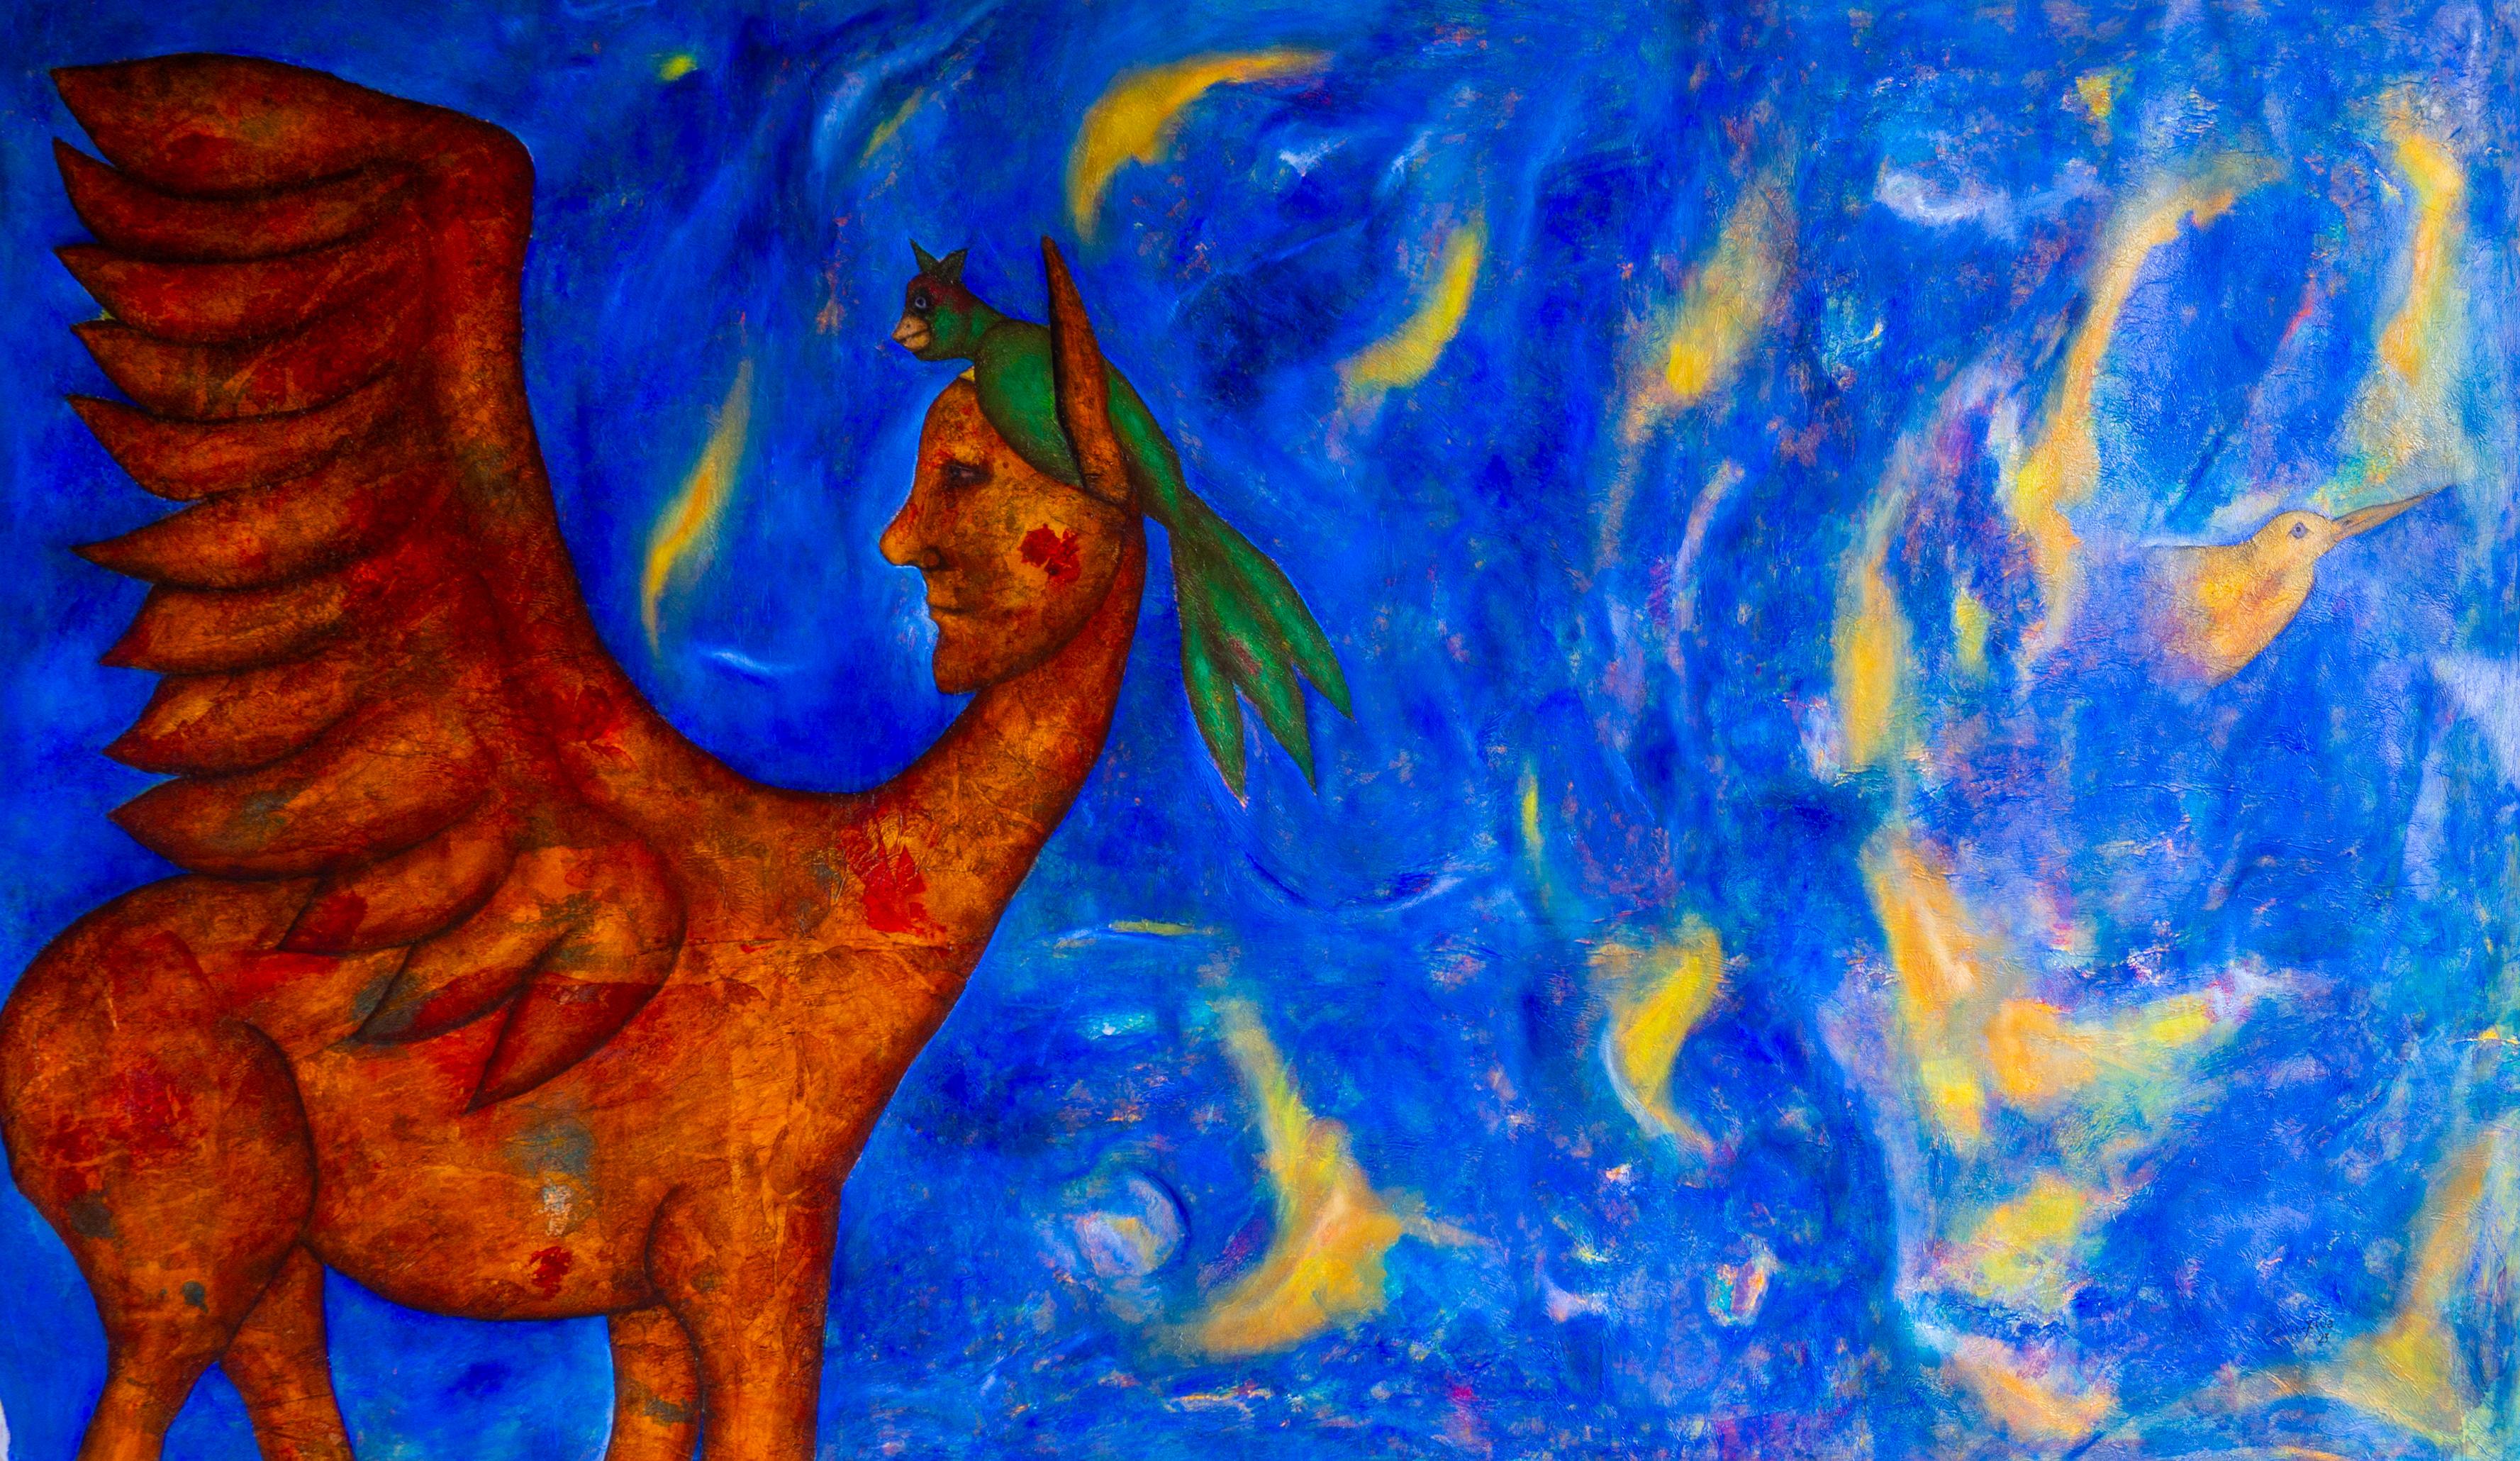 SURREAL Figurative Painting “Night in the Andes” in blue tones, mixed texture